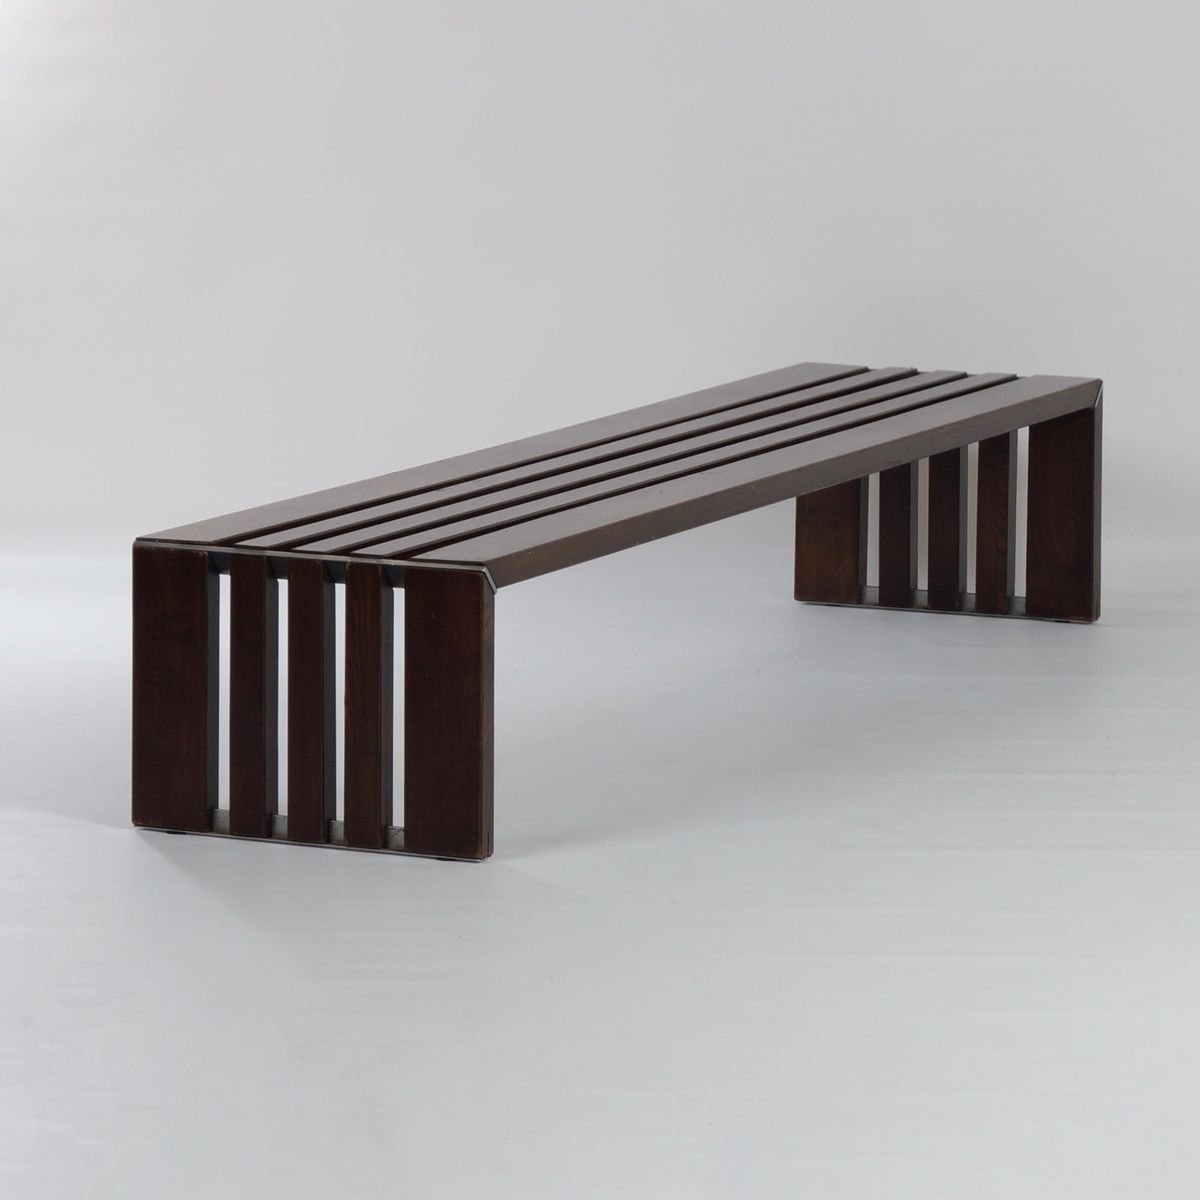 Slat Bench In Ash Wood By Walter Antonis For T Spectrum